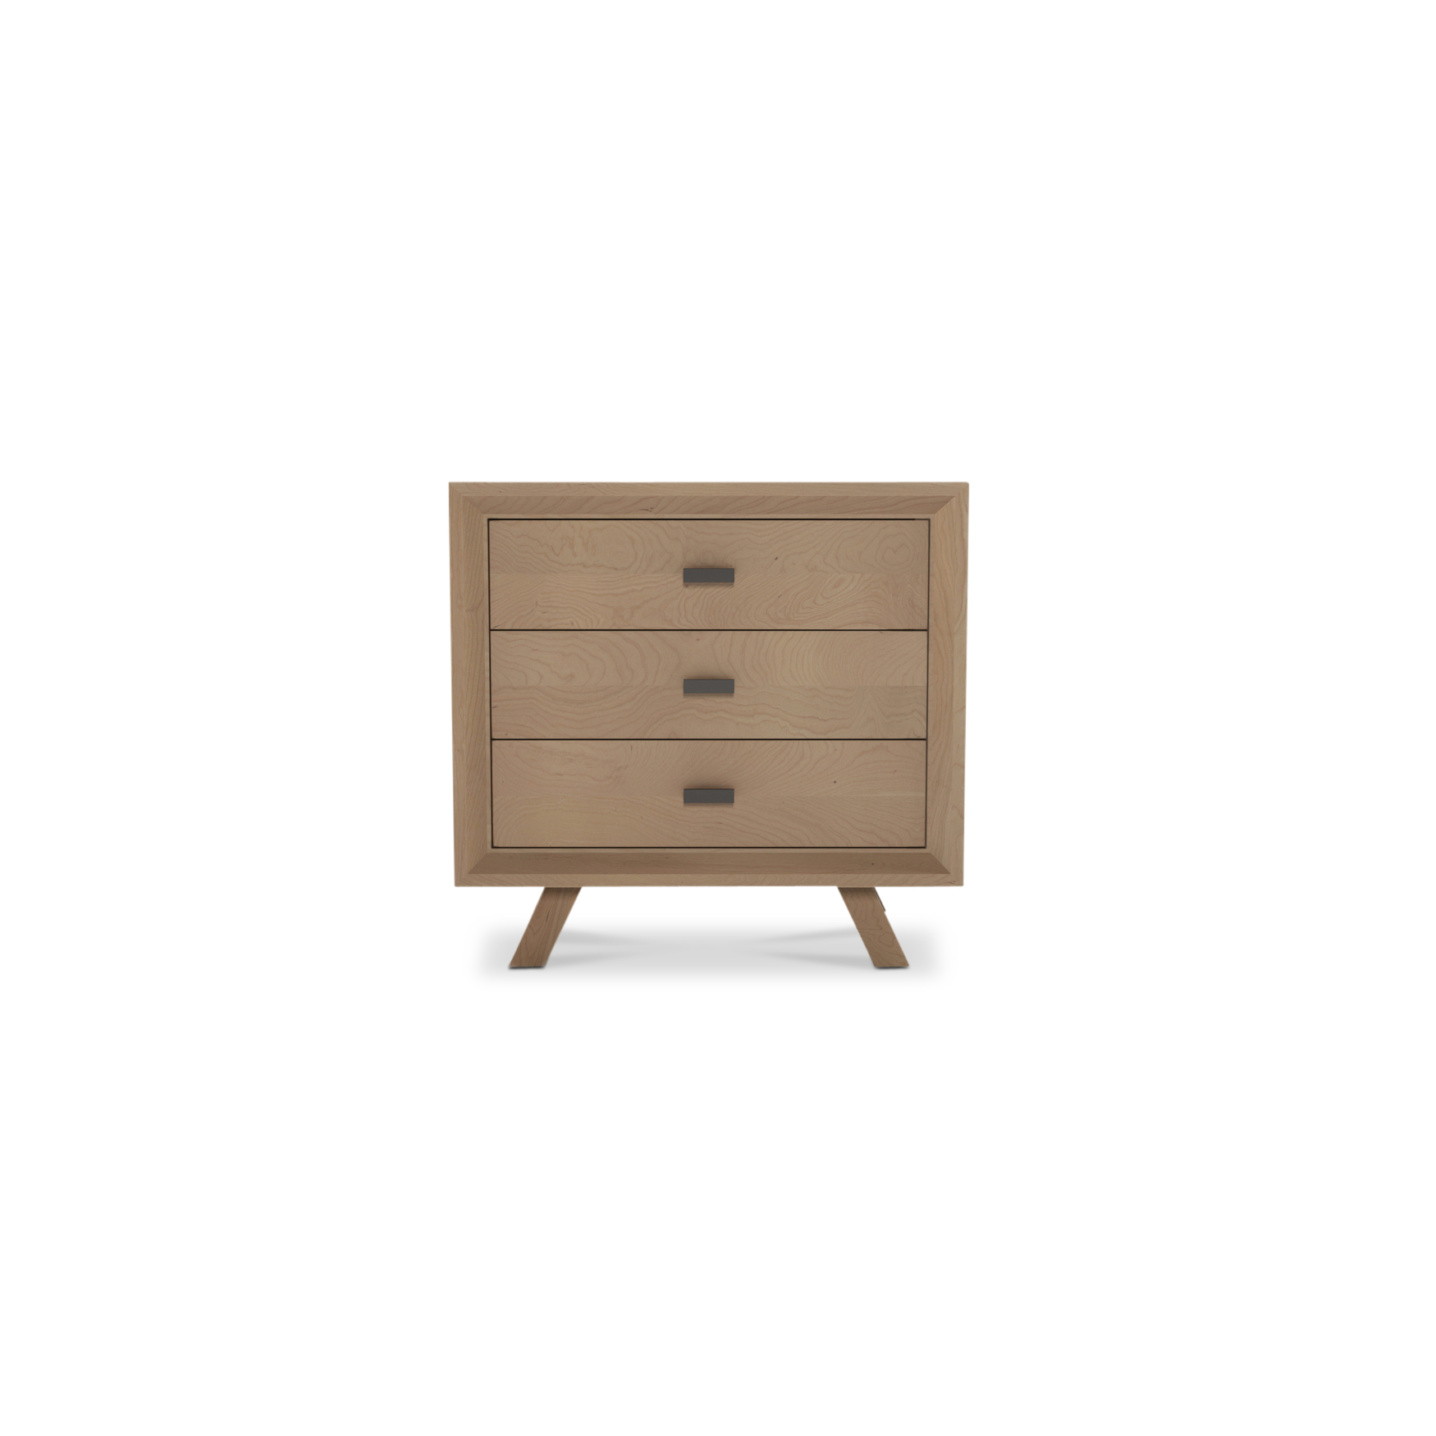 Modern 3 drawer solid cherry wood bedside table